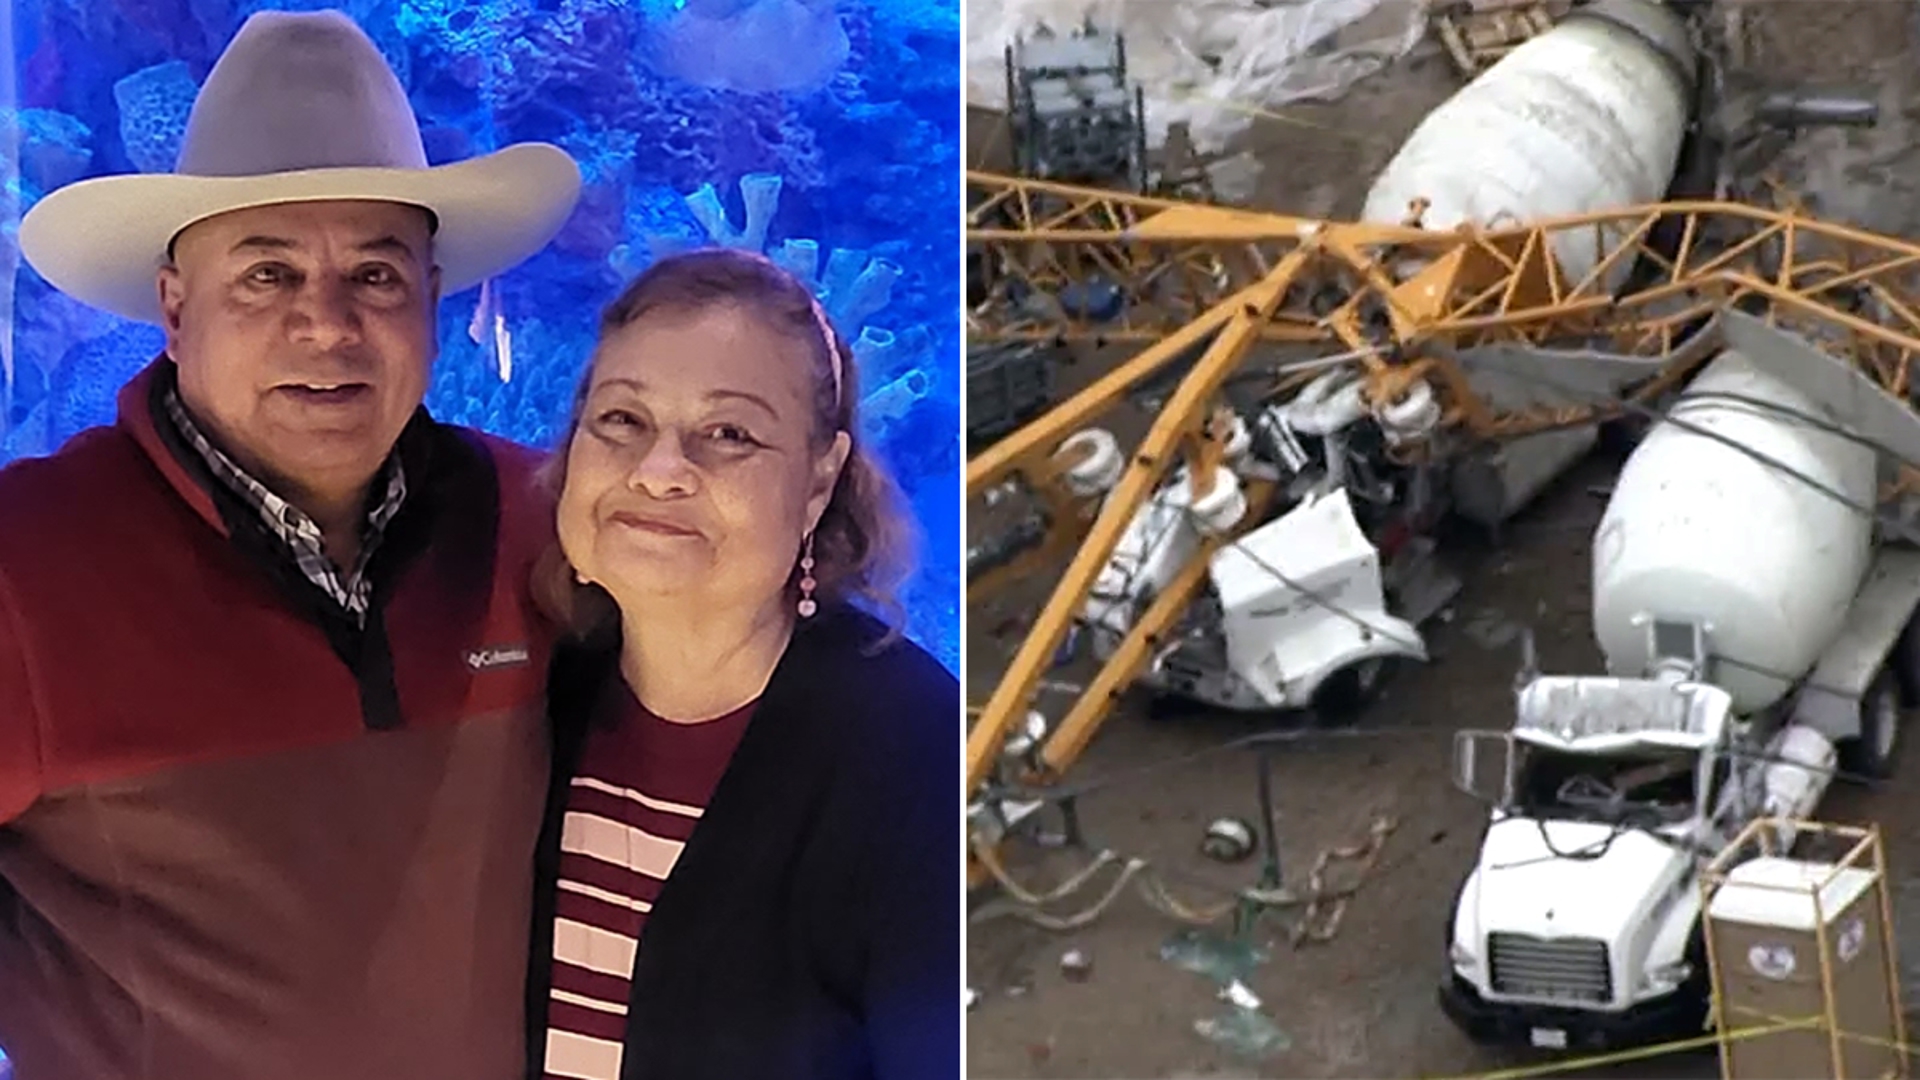 During the storm, 2 large cranes collapsed and fell onto a cement truck with Juan Hernandez, 72, and Crosby Ware, 66, inside. Hernandez was killed and Ware was hurt.